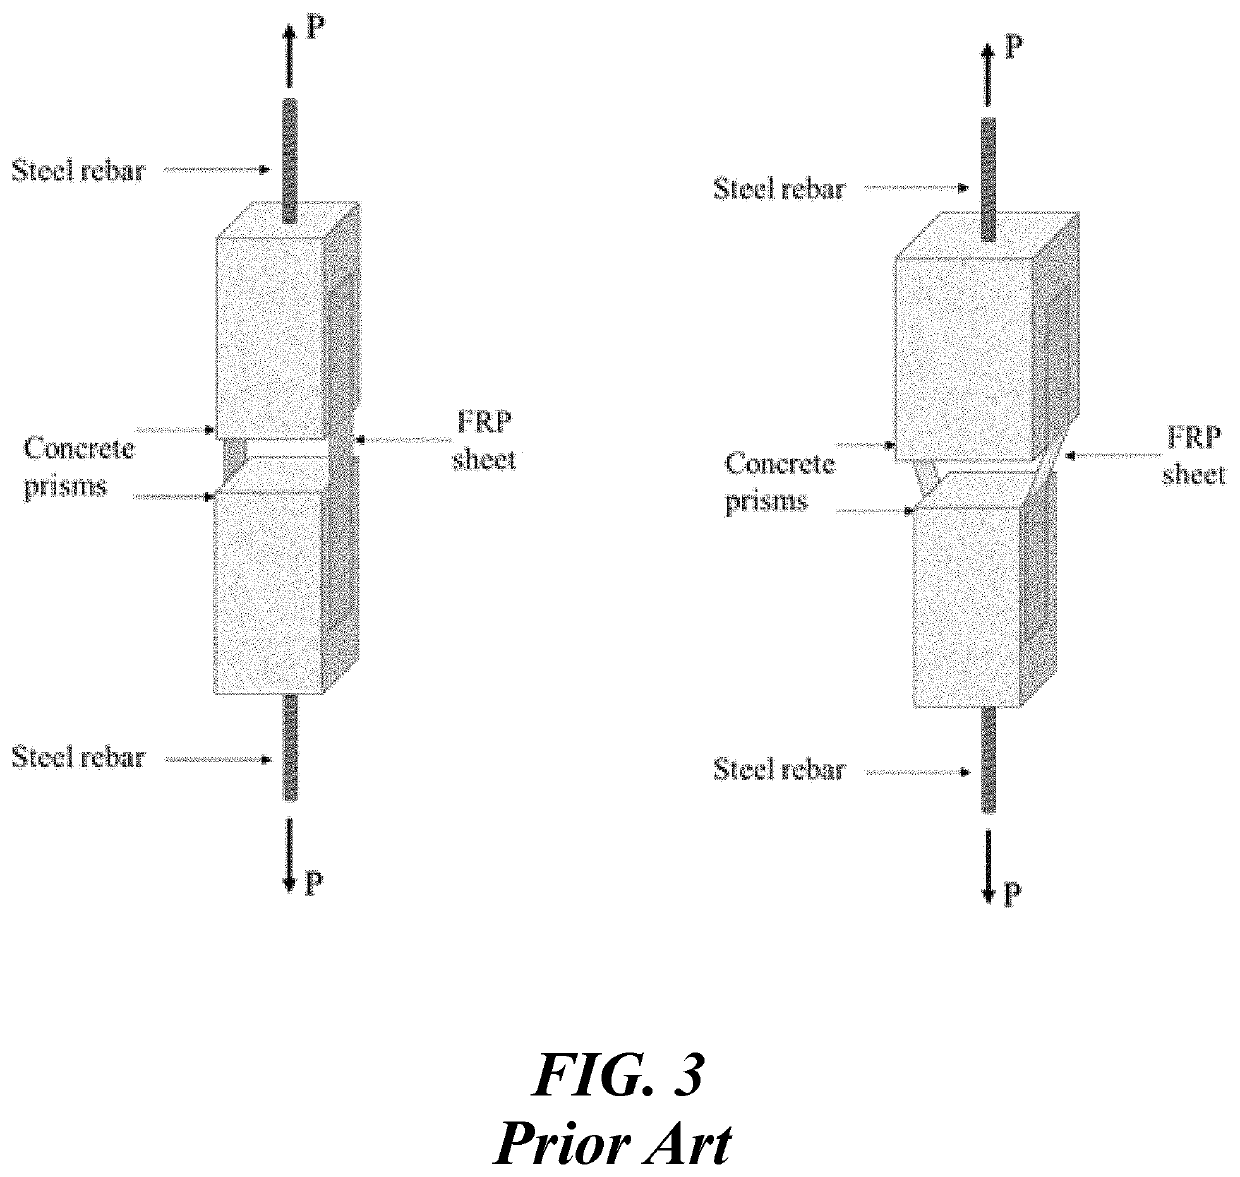 Universal debonding test apparatus for carbon fiber reinforced polymer-concrete system and method for sequential multi-testing